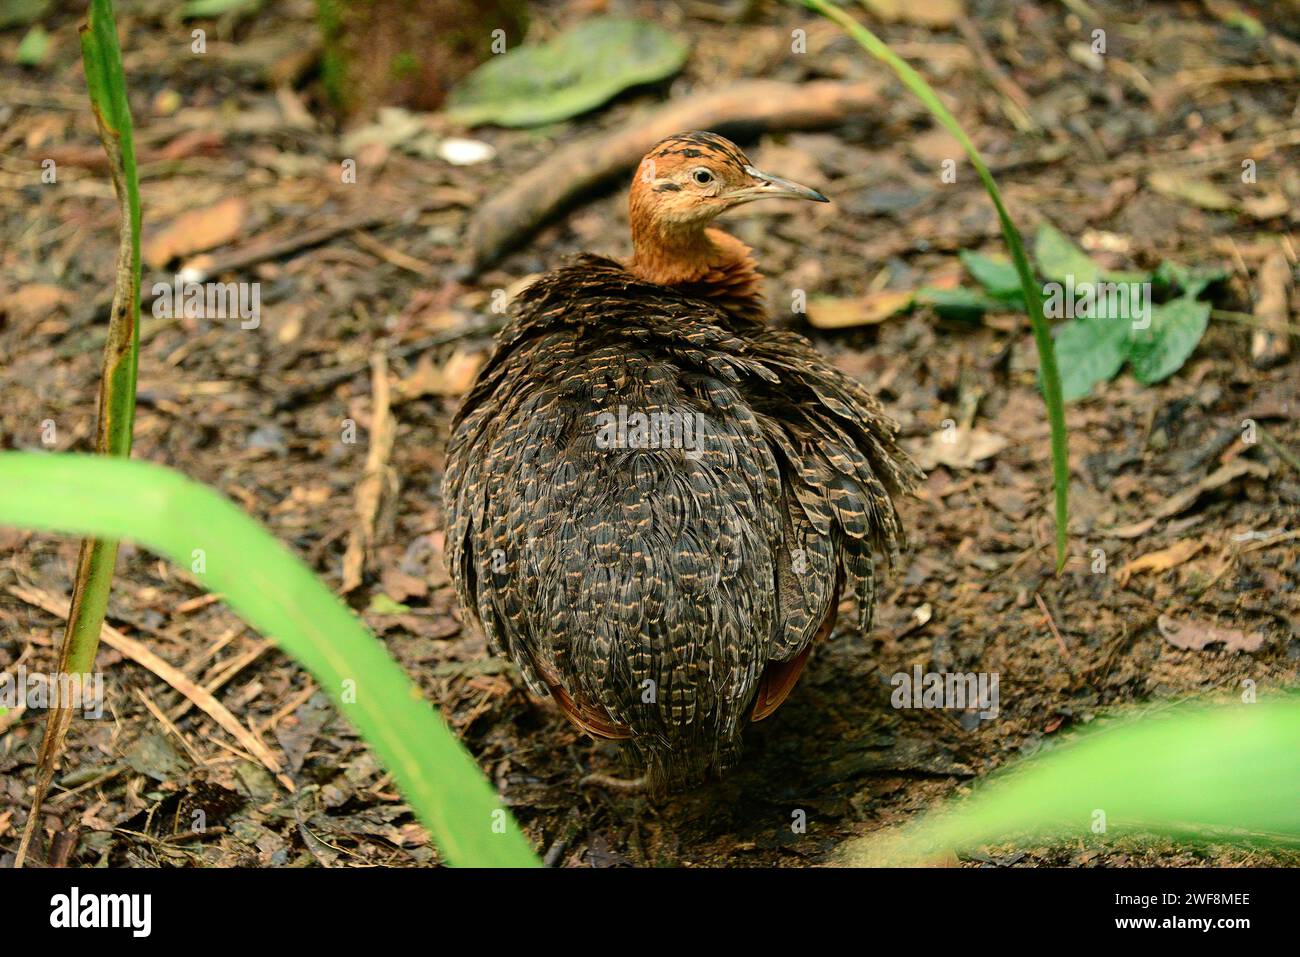 Red-winged tinamou (Rhynchotus rufescens) is a bird native to South America. This photo was taken in Brazil. Stock Photo